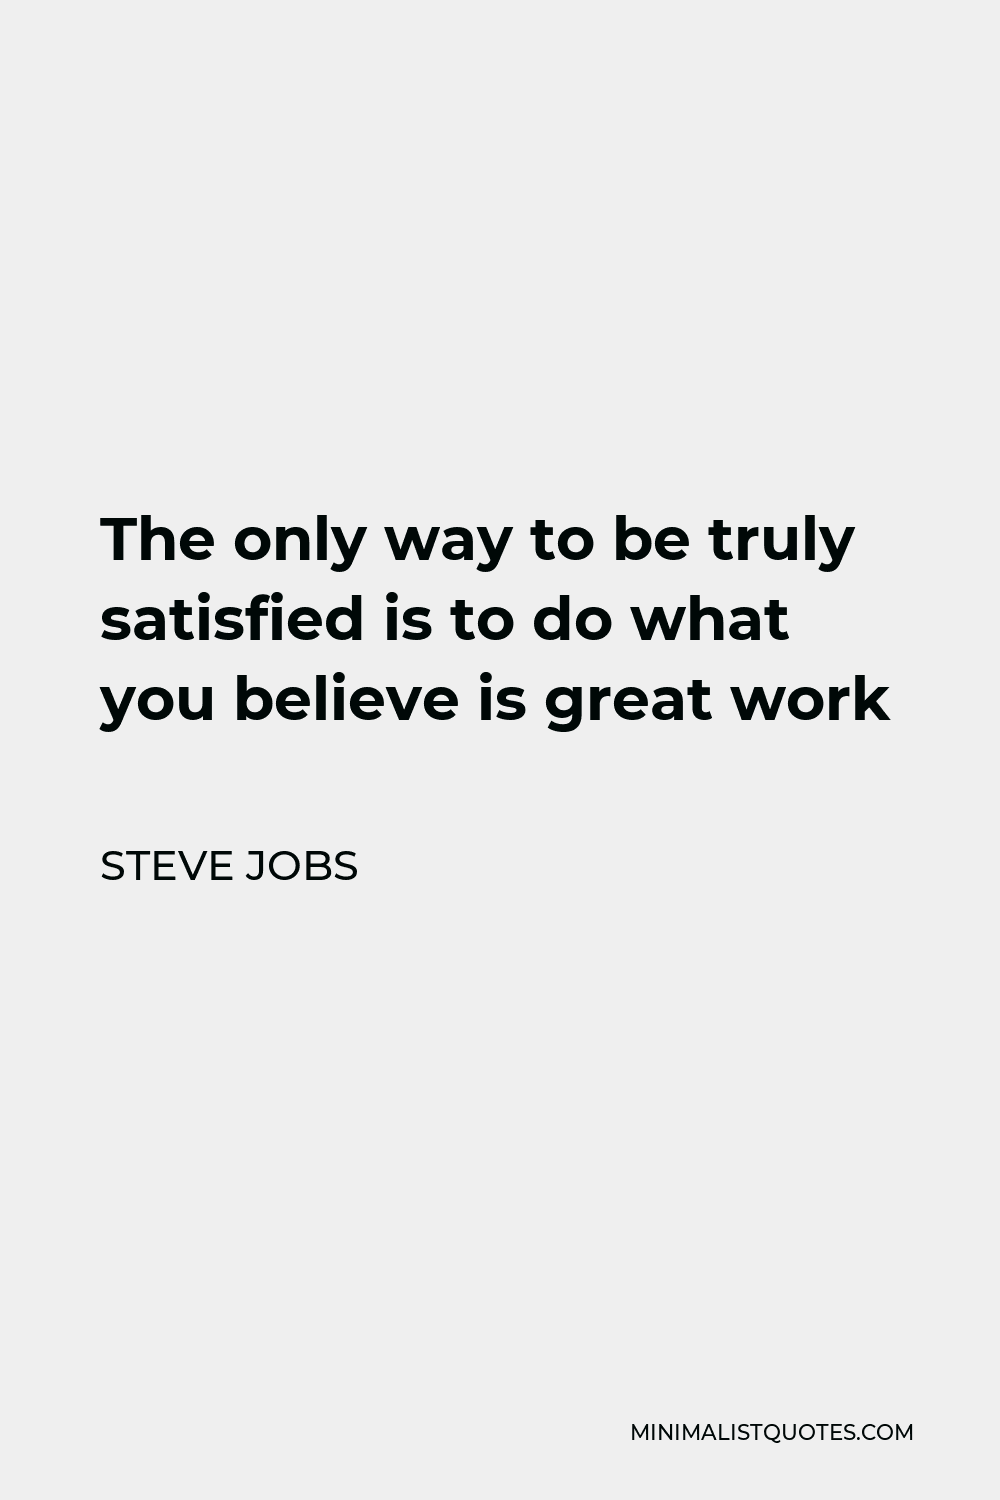 Steve Jobs Quote - The only way to be truly satisfied is to do what you believe is great work